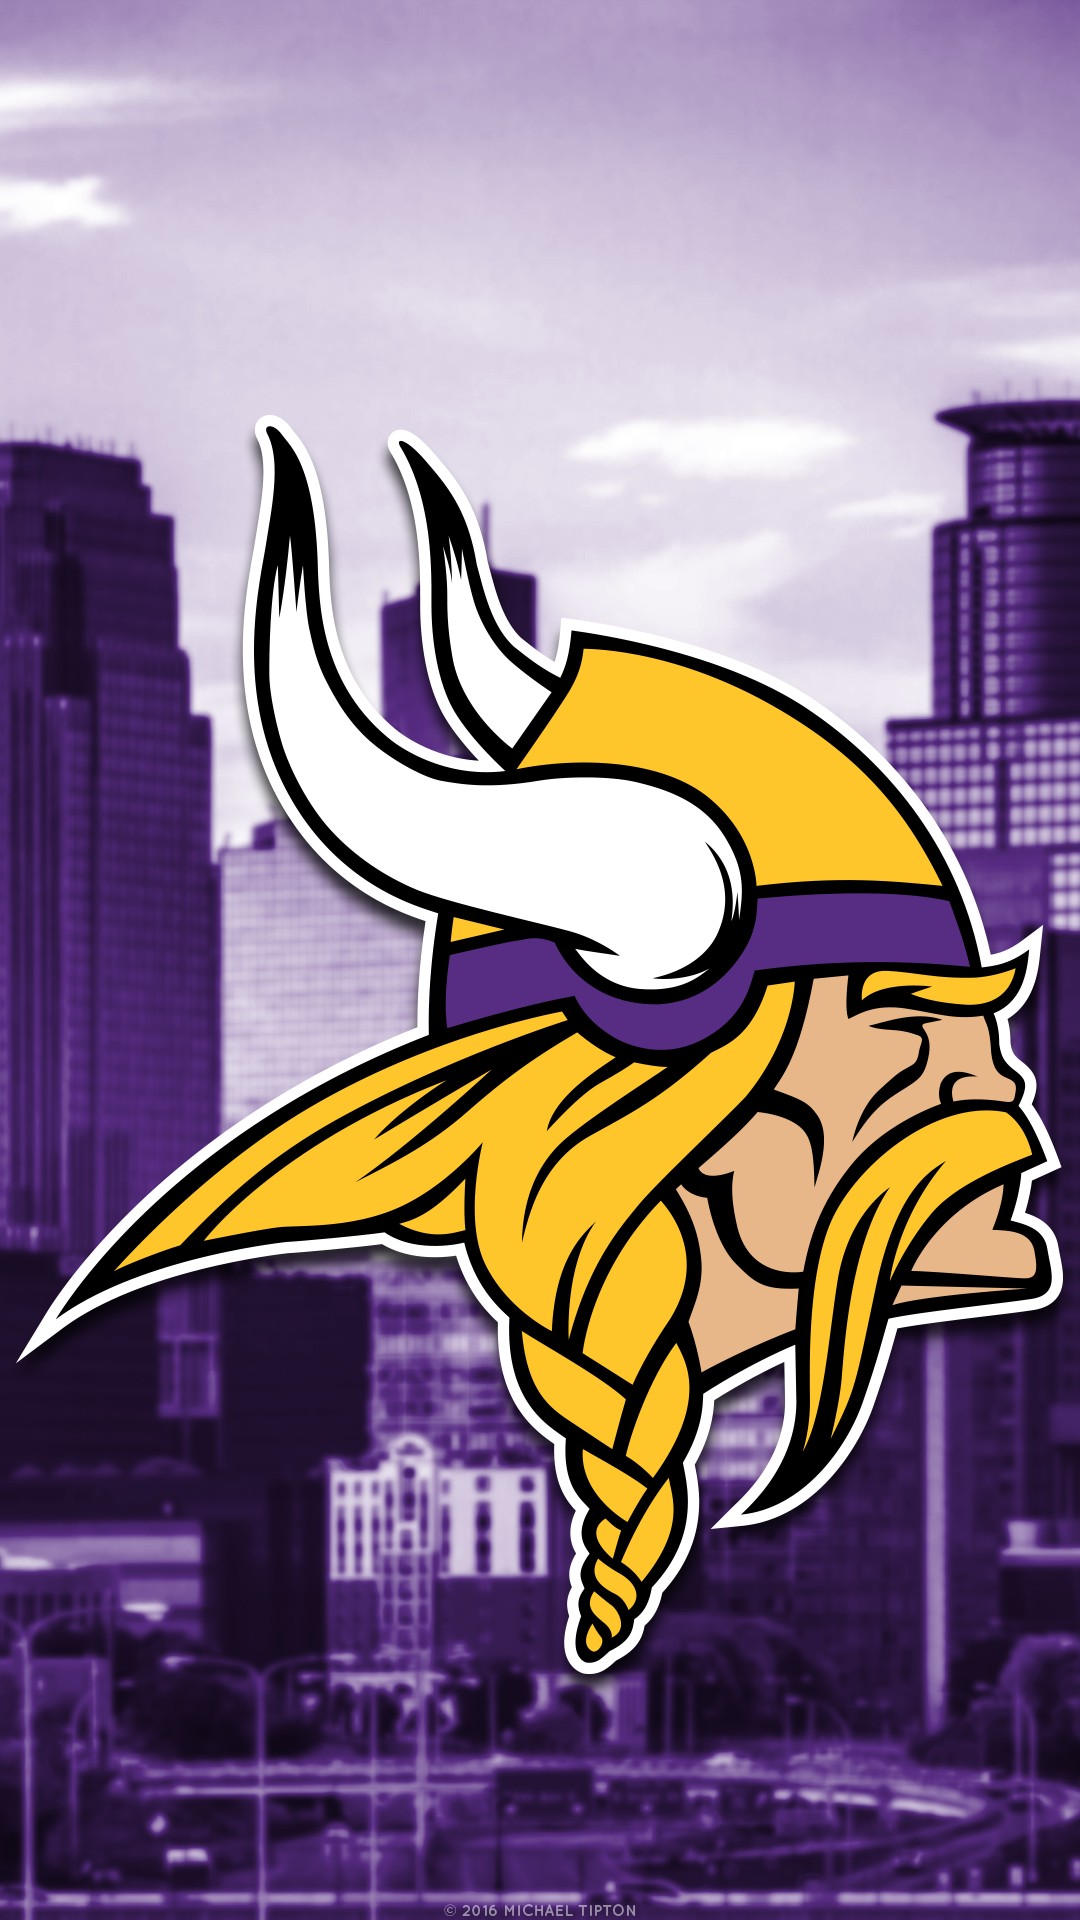 Wallpapers iPhone Minnesota Vikings with high-resolution 1080x1920 pixel. Donwload and set as wallpaper for your iPhone X, iPhone XS home screen backgrounds, XS Max, XR, iPhone8 lock screen wallpaper, iPhone 7, 6, SE and other mobile devices